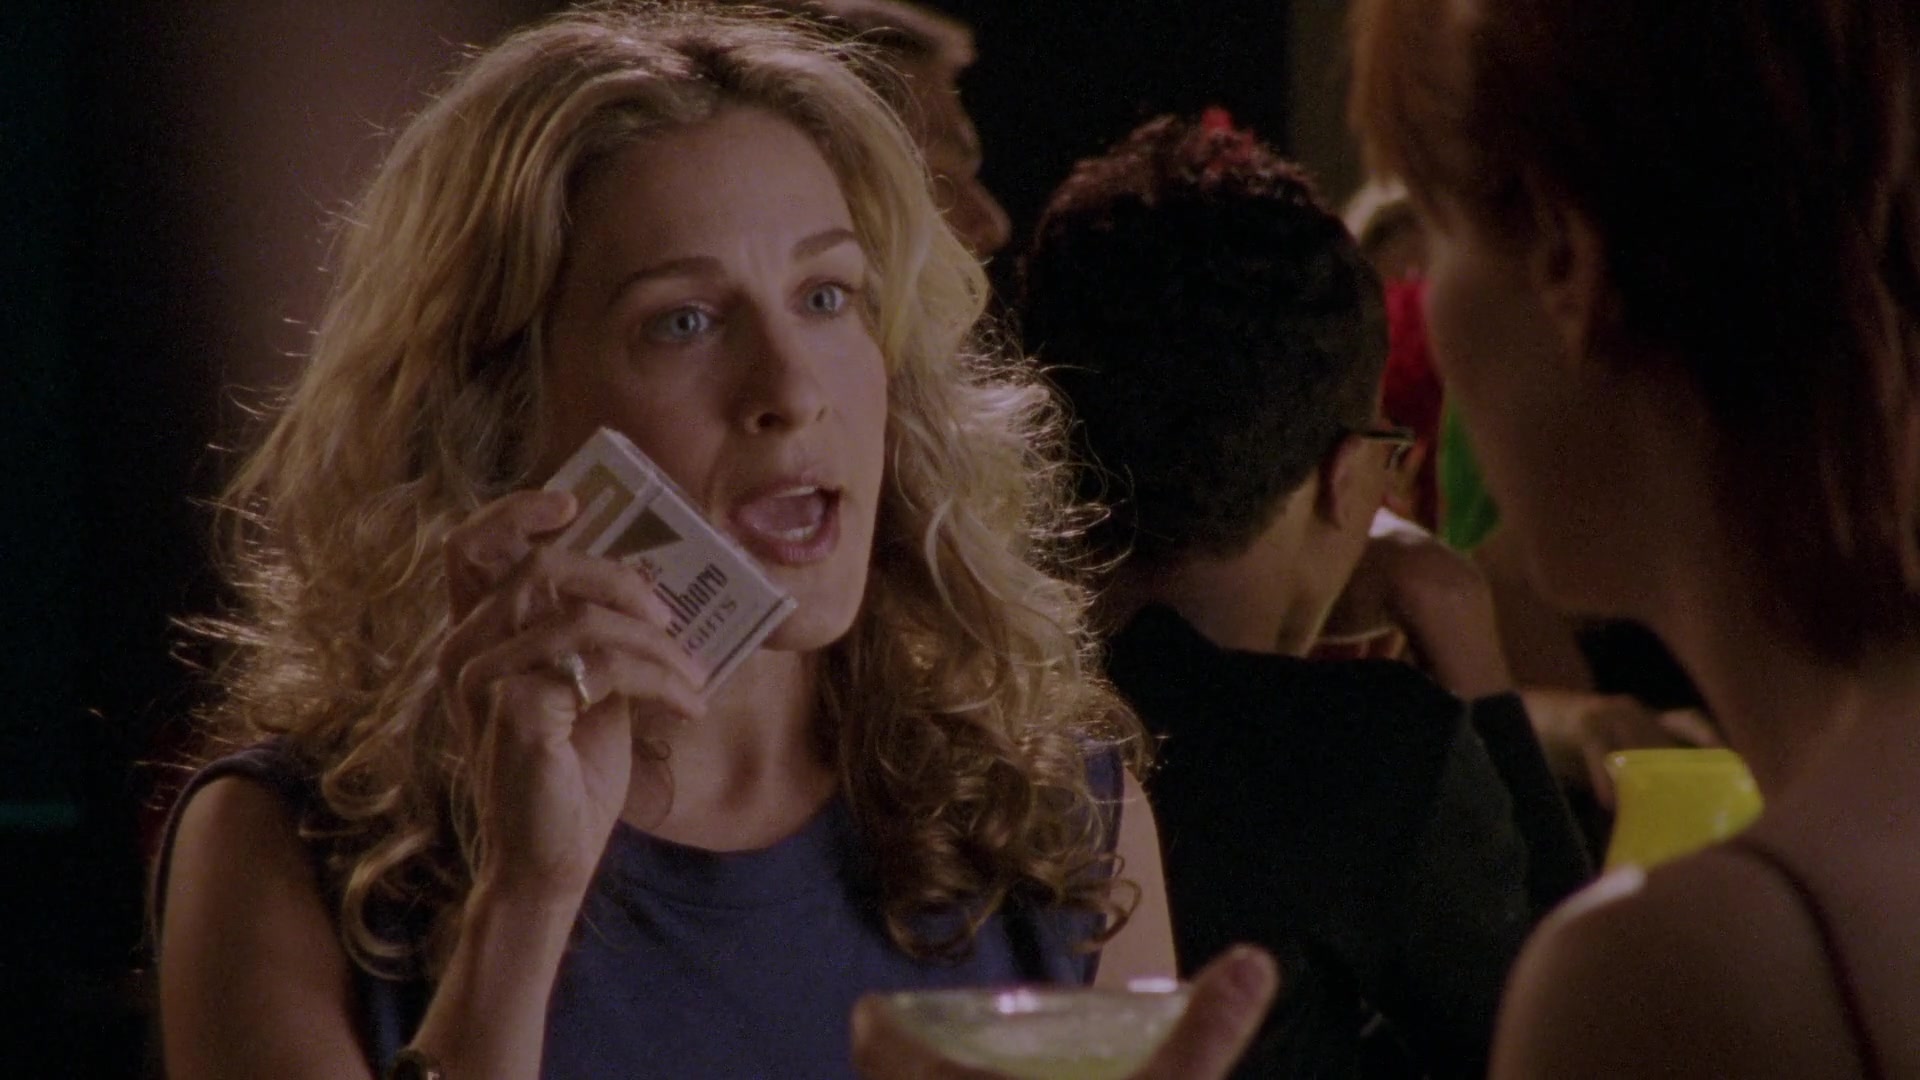 Marlboro Lights Cigarettes Of Sarah Jessica Parker As Carrie Bradshaw In Sex And The City S03e11 